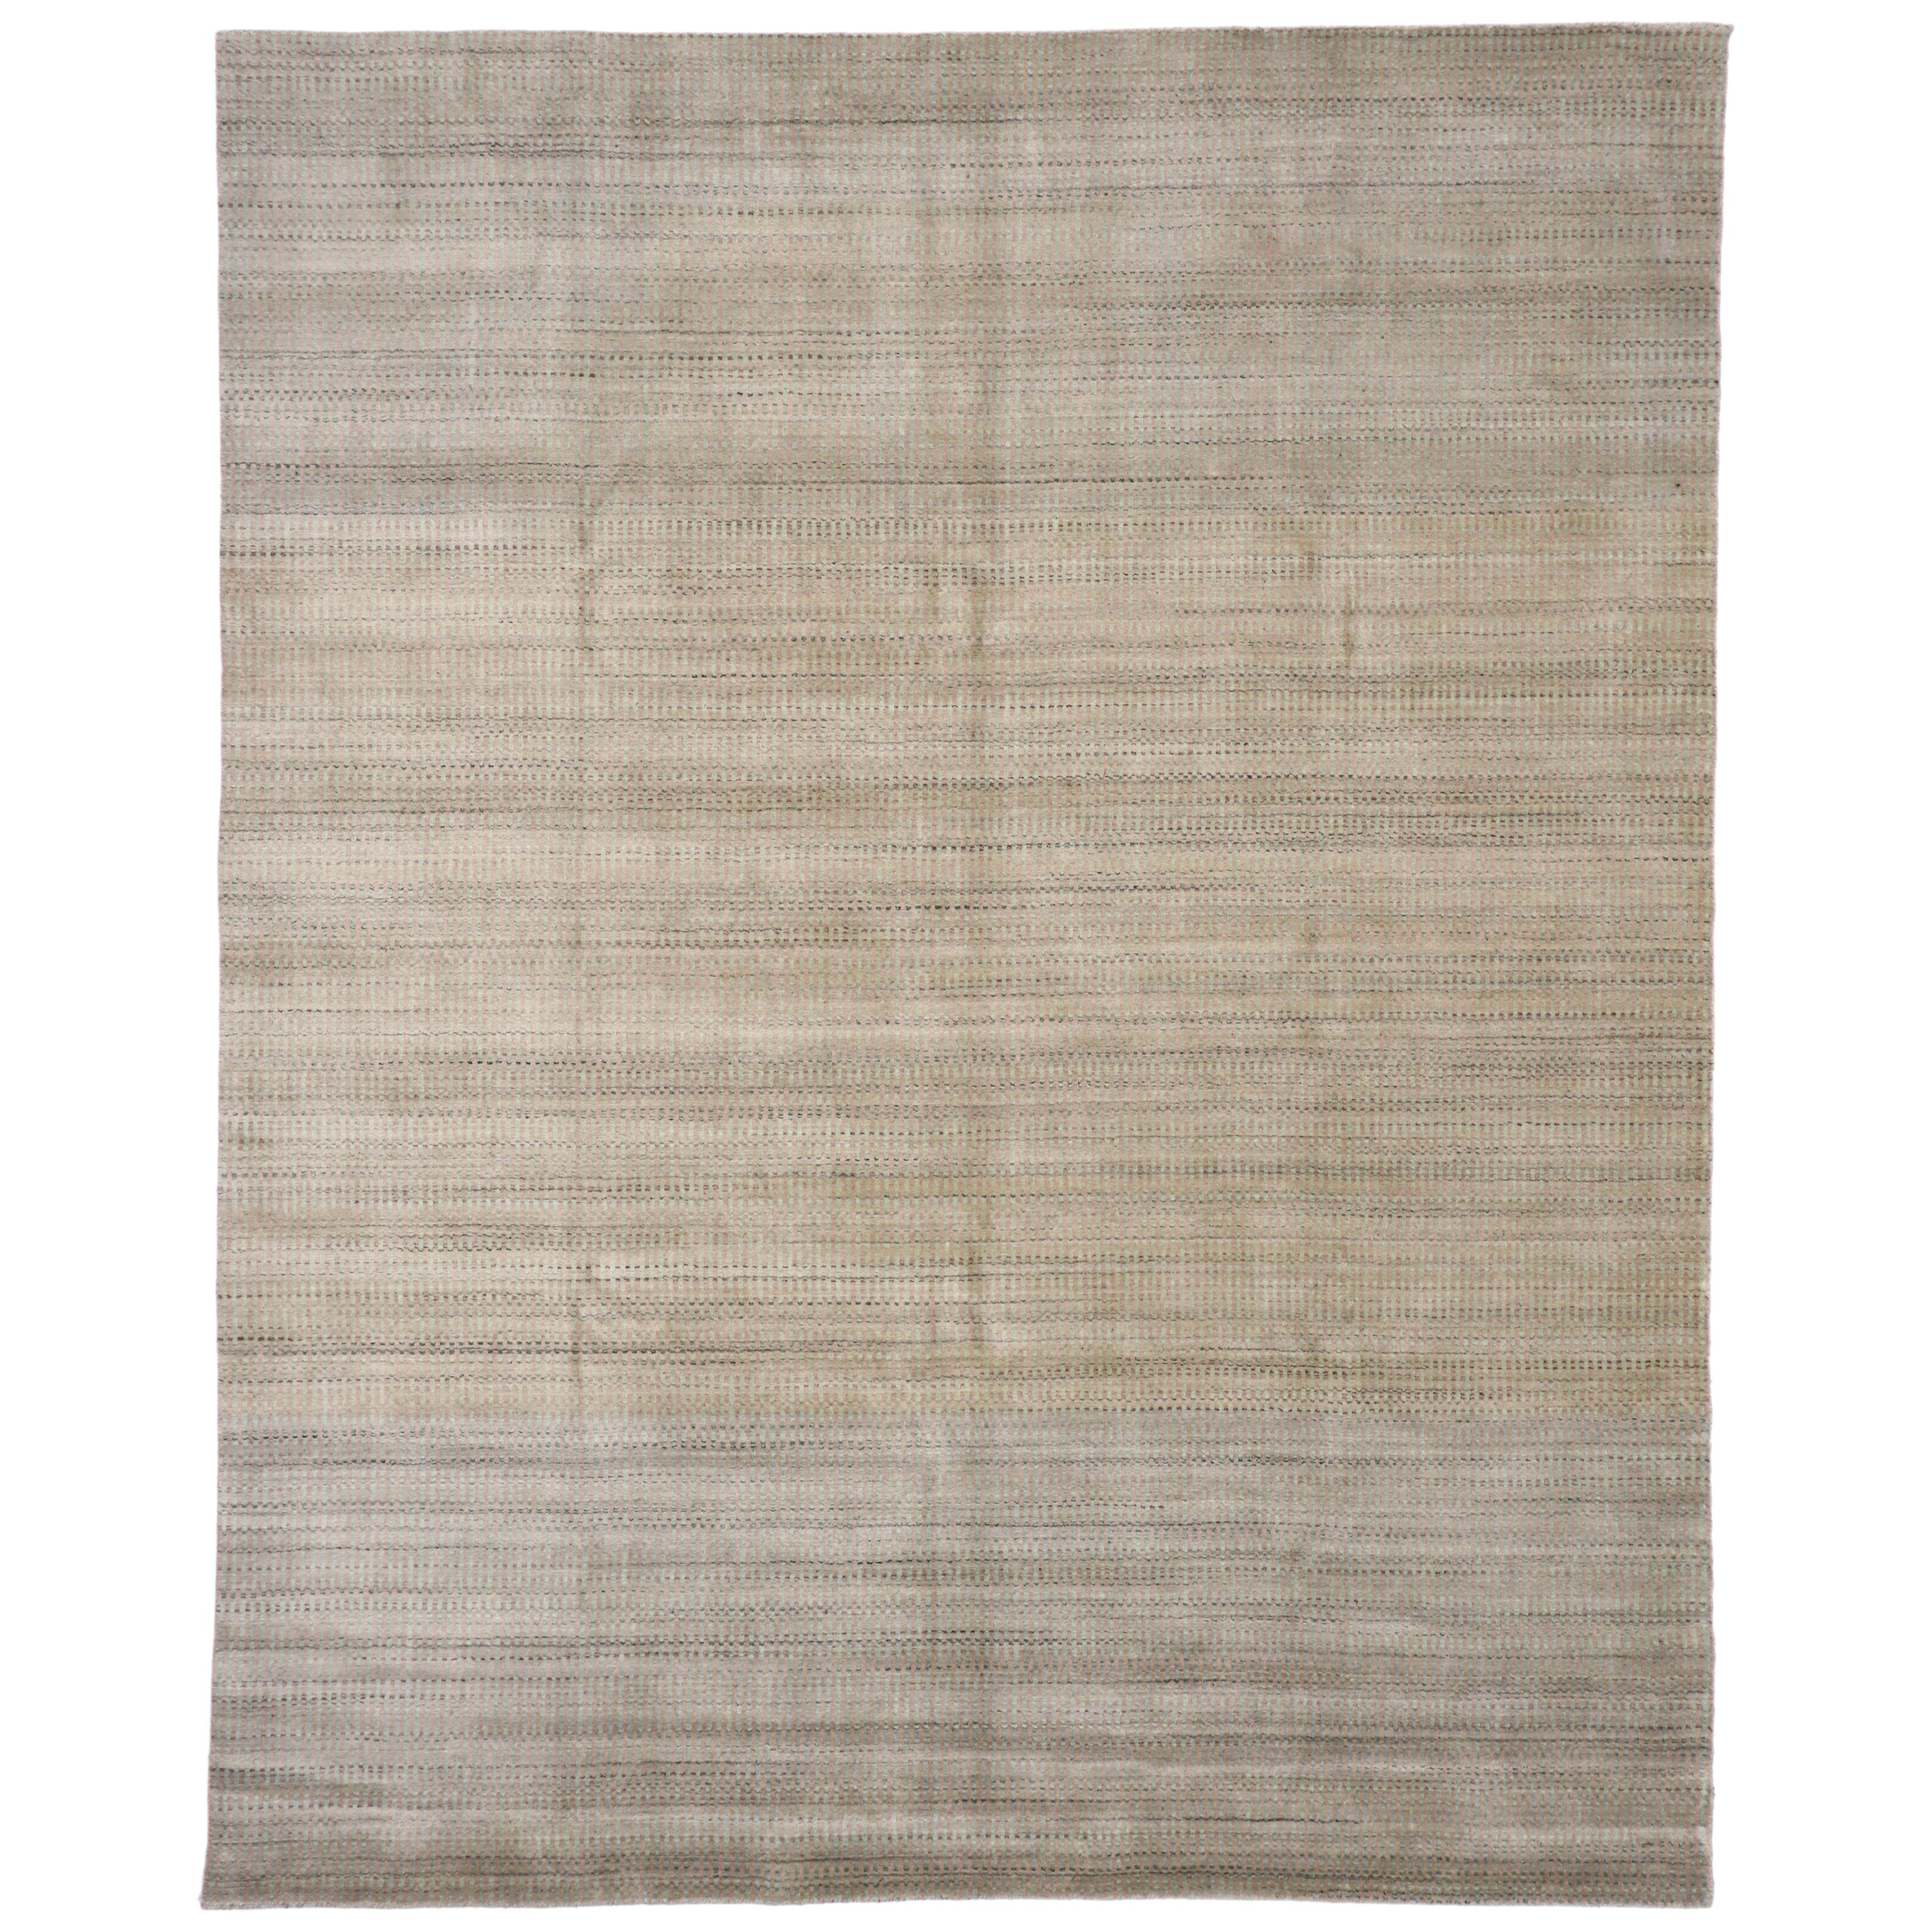 New Transitional Ombre Area Rug with French Country and Cottage Style For Sale